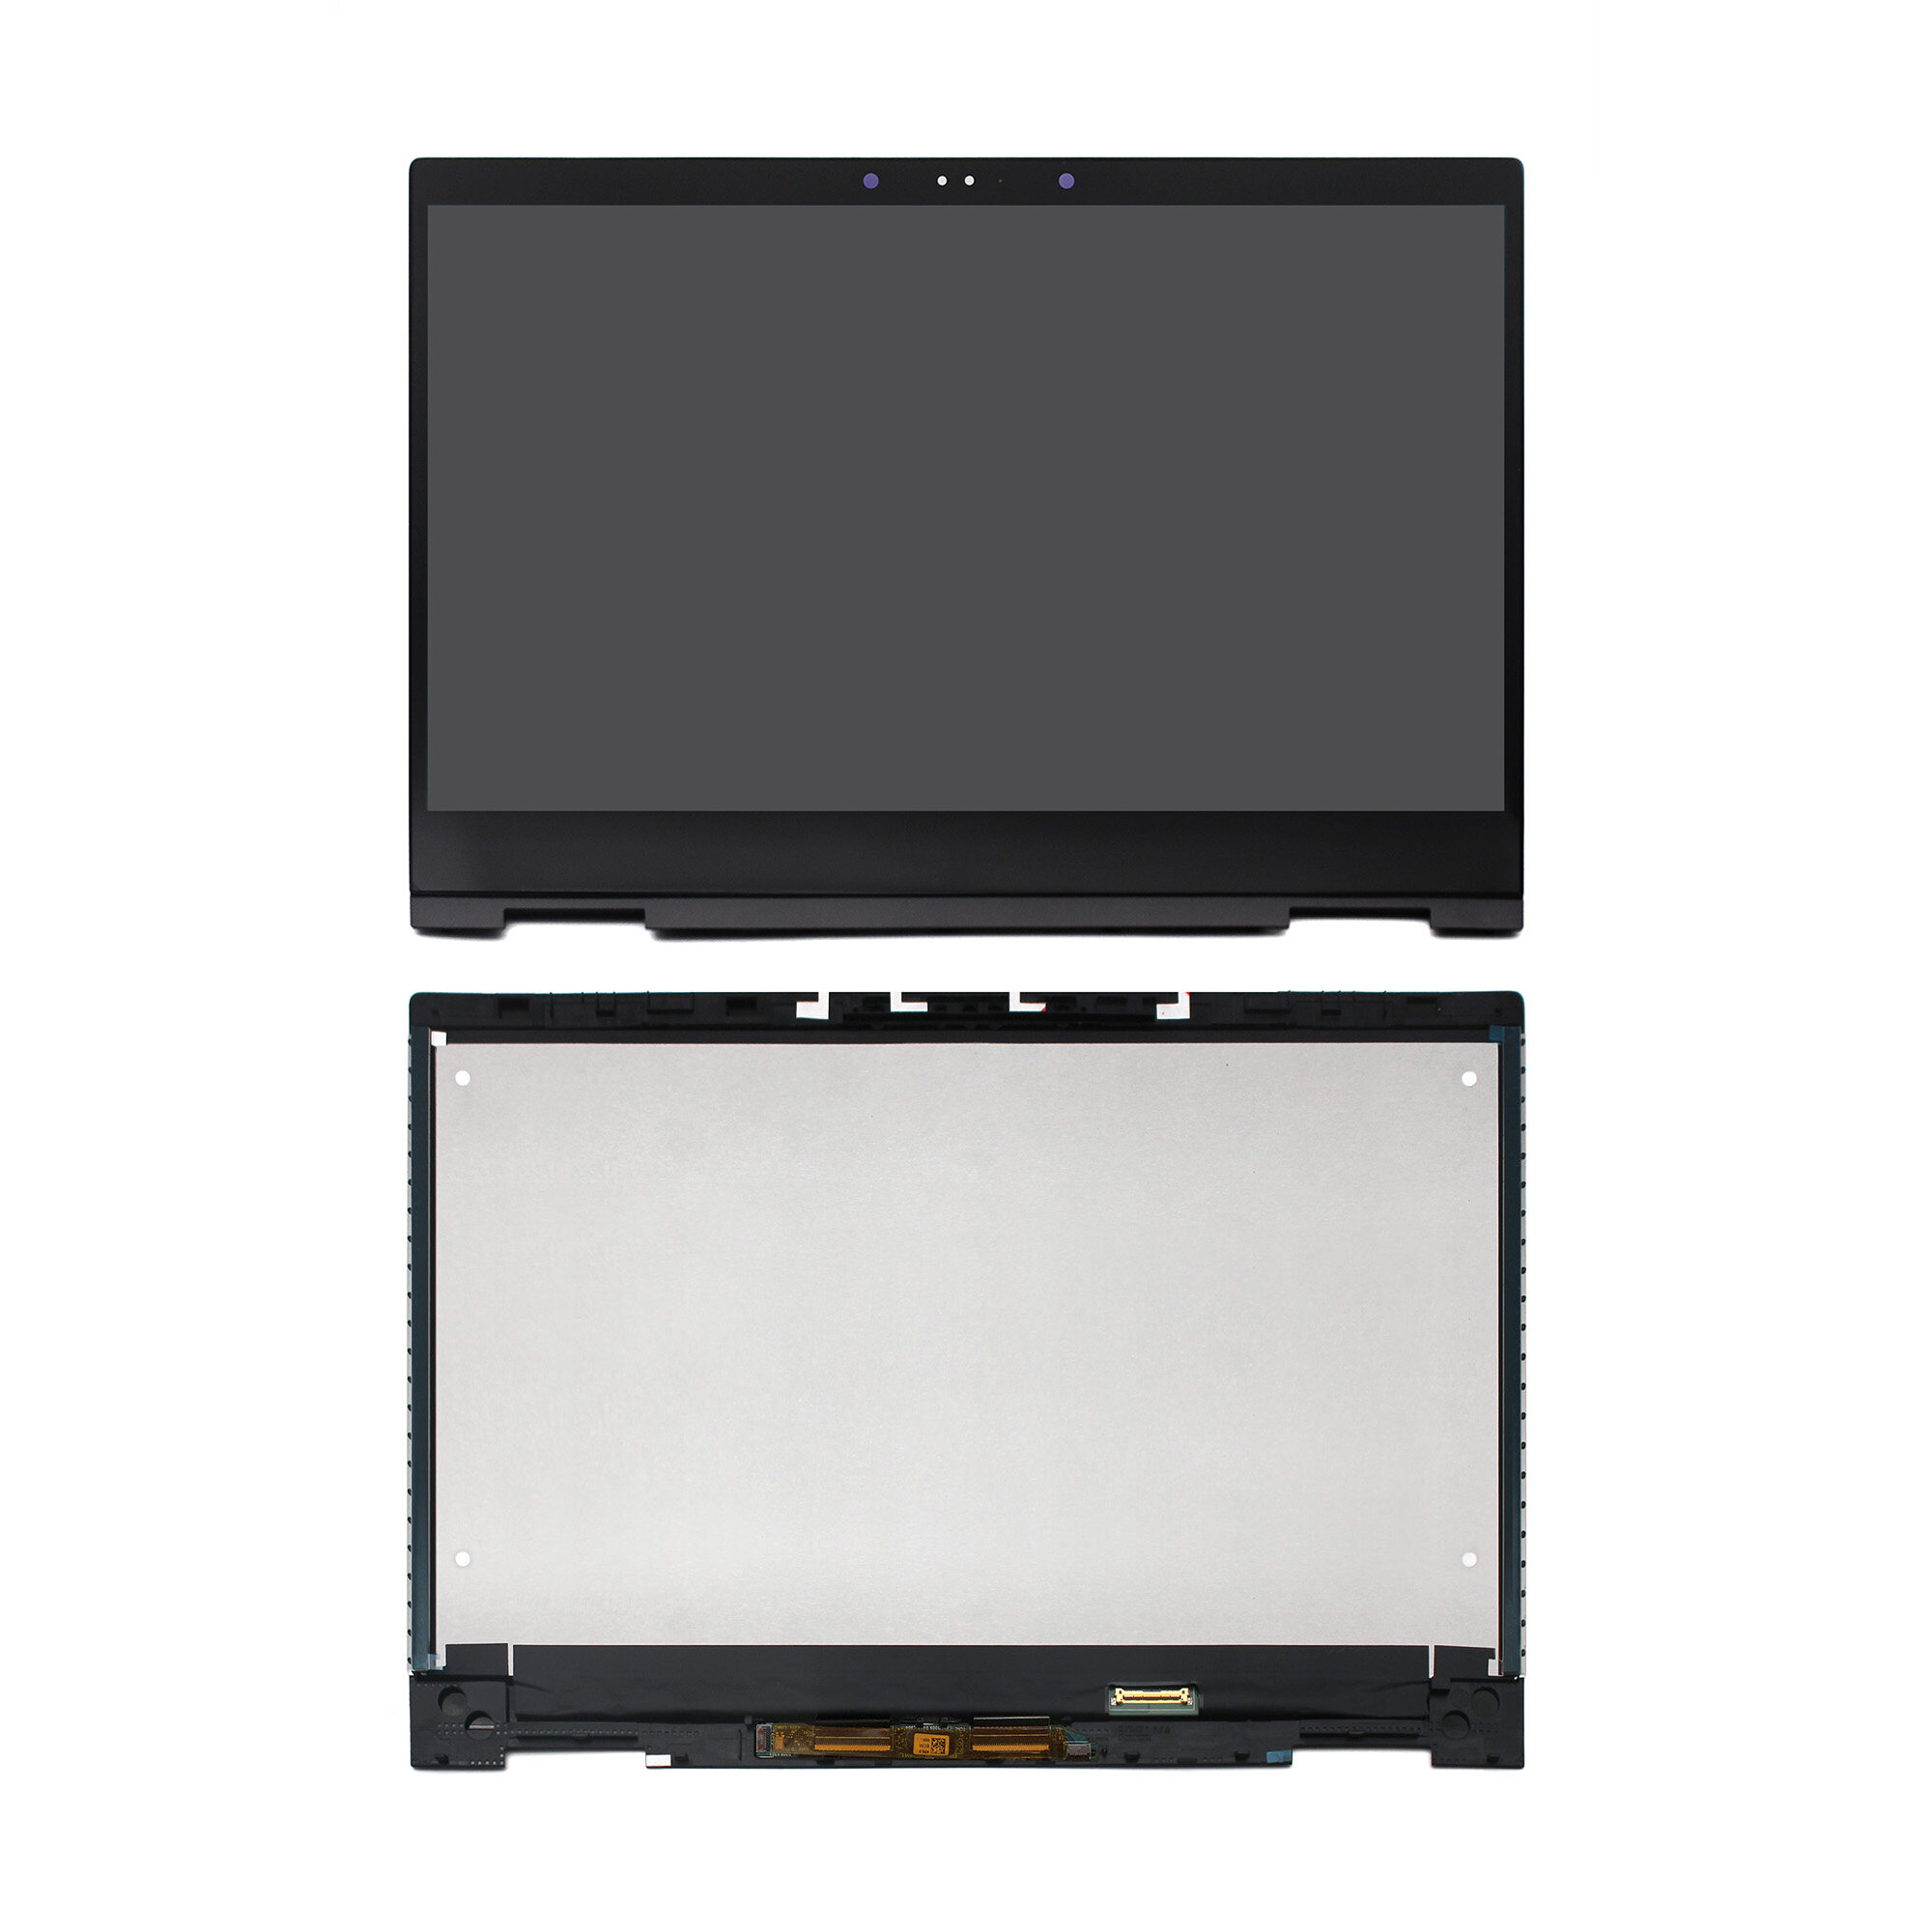 Kreplacement LCD Display Touch Screen Digitizer Assembly+Control Board+Bezel For HP ENVY x360 13-ag0001na 13-ag0001ns 13-ag0002na 13-ag0002ns